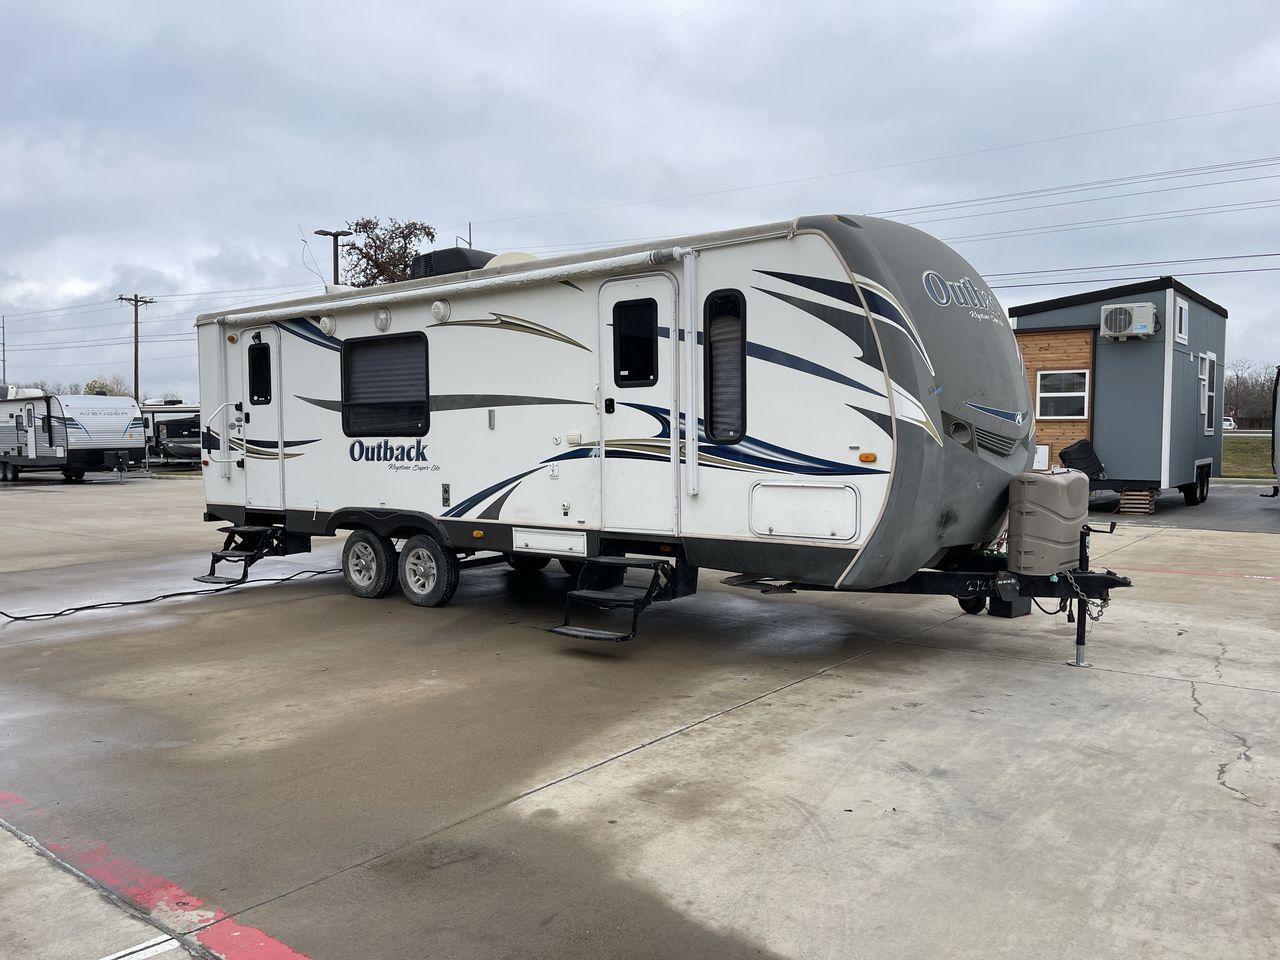 2012 WHITE KEYSTONE OUTBACK 272RK (4YDT27227CB) , Length: 30.33 ft. | Dry Weight: 5,976 lbs. | Gross Weight: 7,800 lbs. | Slides: 1 transmission, located at 4319 N Main St, Cleburne, TX, 76033, (817) 678-5133, 32.385960, -97.391212 - Explore more reasons that emphasize the benefits of having this RV as your own. (1) Navigate campsites and winding roads with ease thanks to the single-axle design and 30' 4"" length. (2) Built to withstand the elements, the Outback is ready for all your outdoor adventures. (3) Keep clothes and - Photo #22